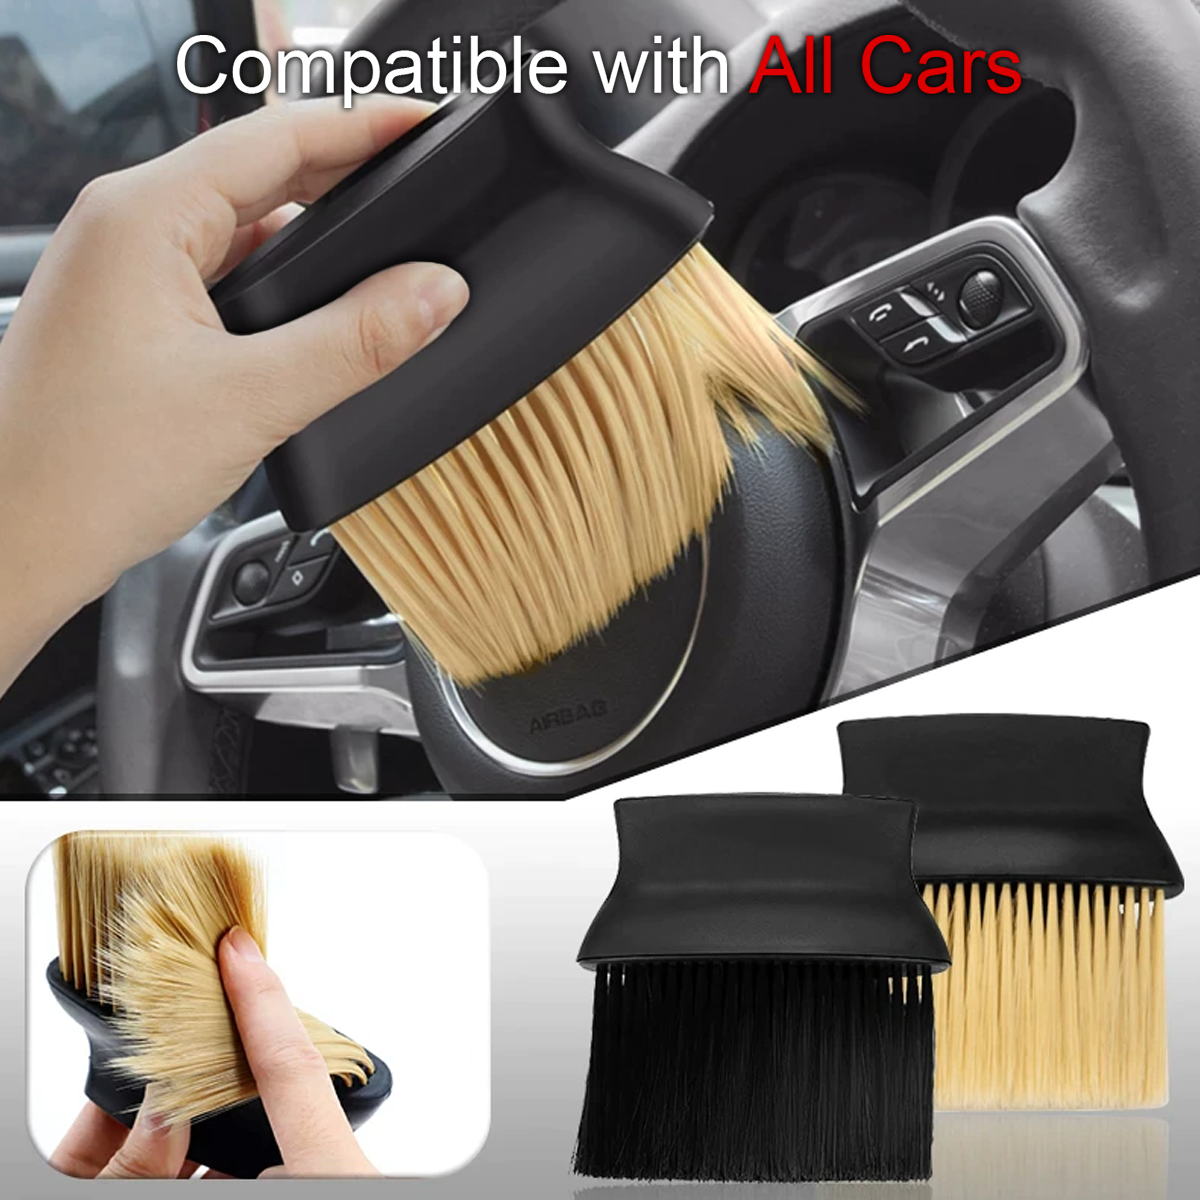 Car Cleaning Brushes Duster, Custom Fit For Your Cars, Soft Bristles Detailing Brush Dusting Tool for Automotive Dashboard, Air Conditioner Vents, Leather, Computer, Scratch Free